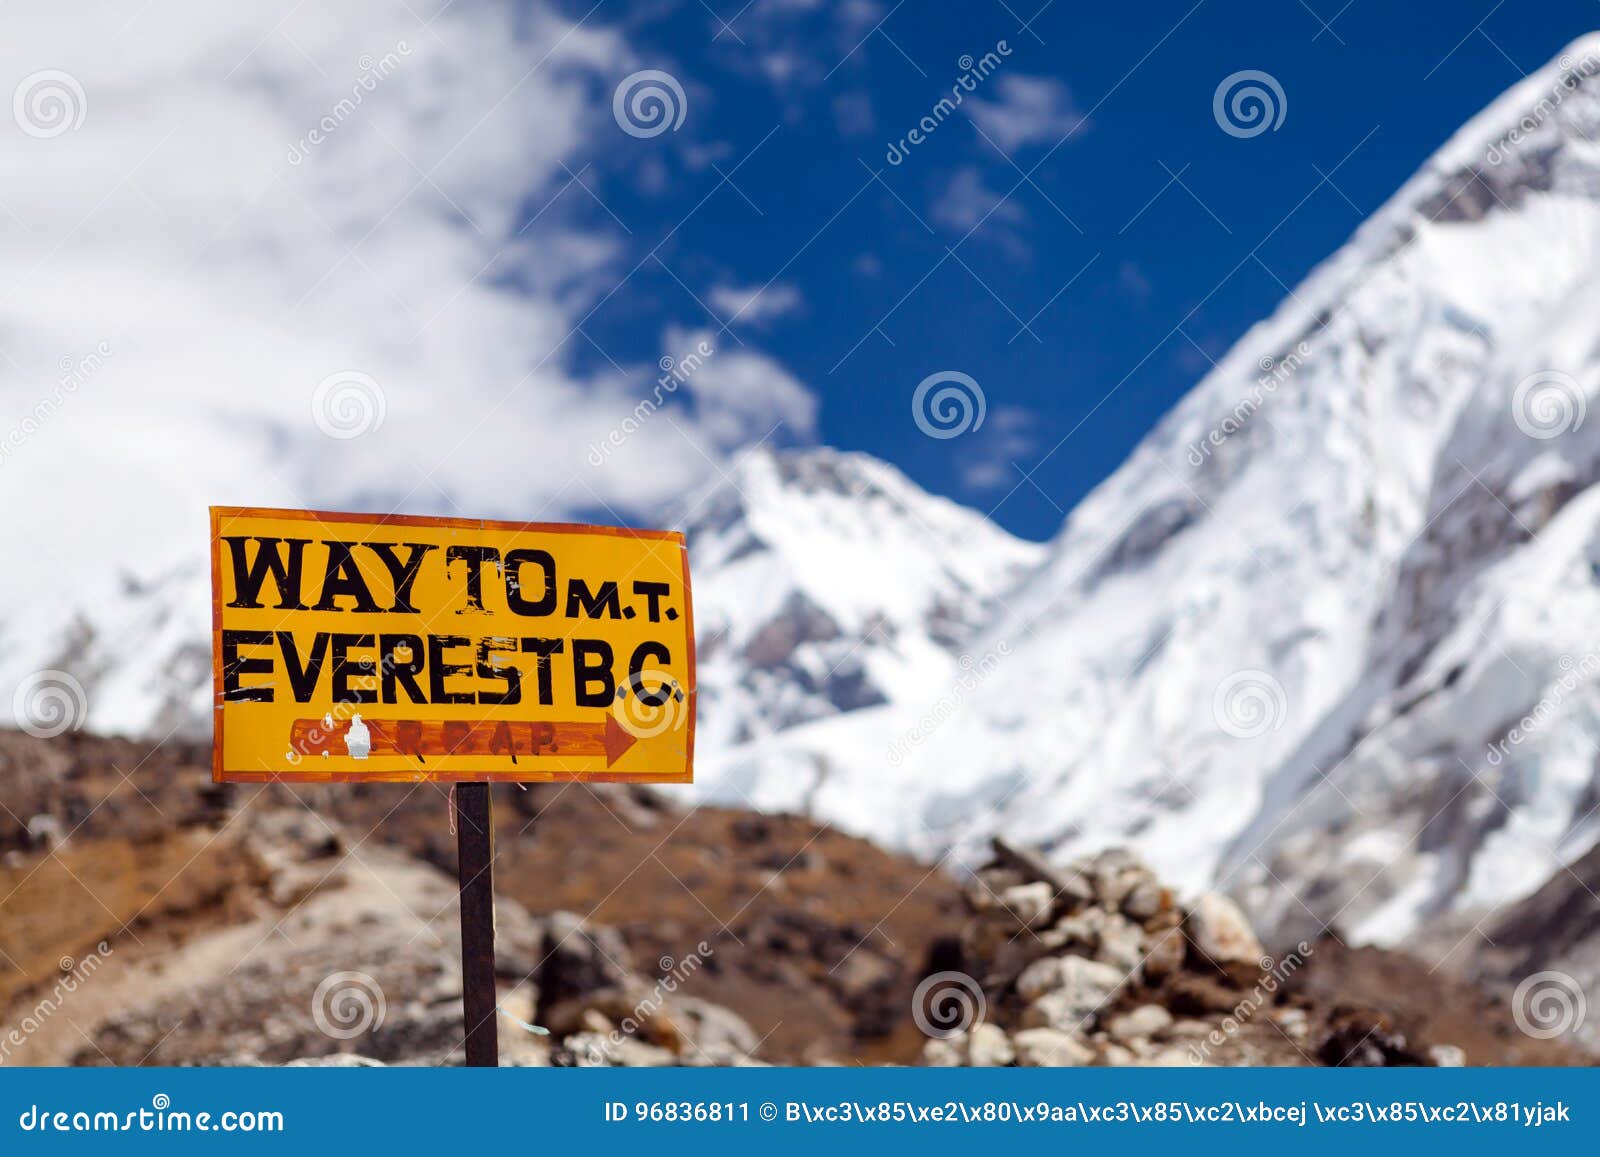 mount everest signpost, travel to base camp